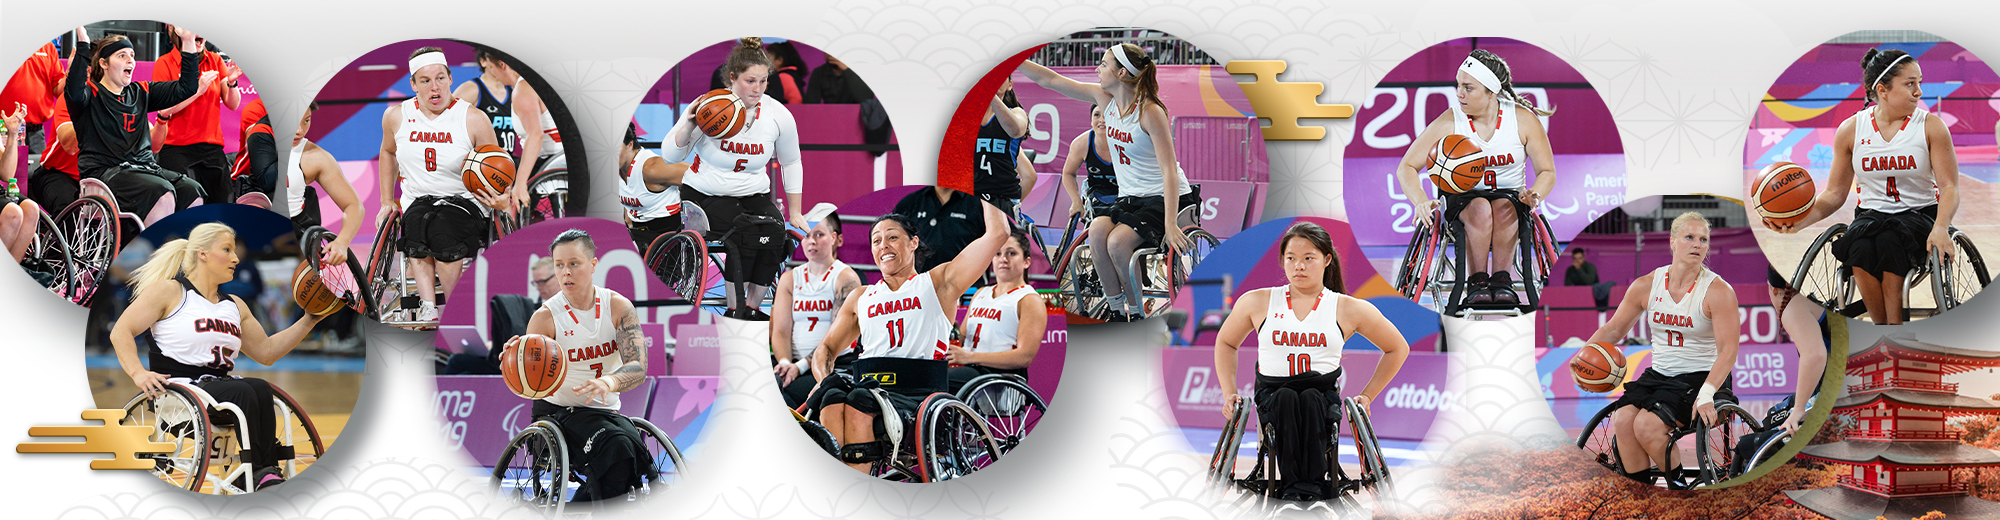 female Wheelchair basketball athletes on a Tokyo inspired background